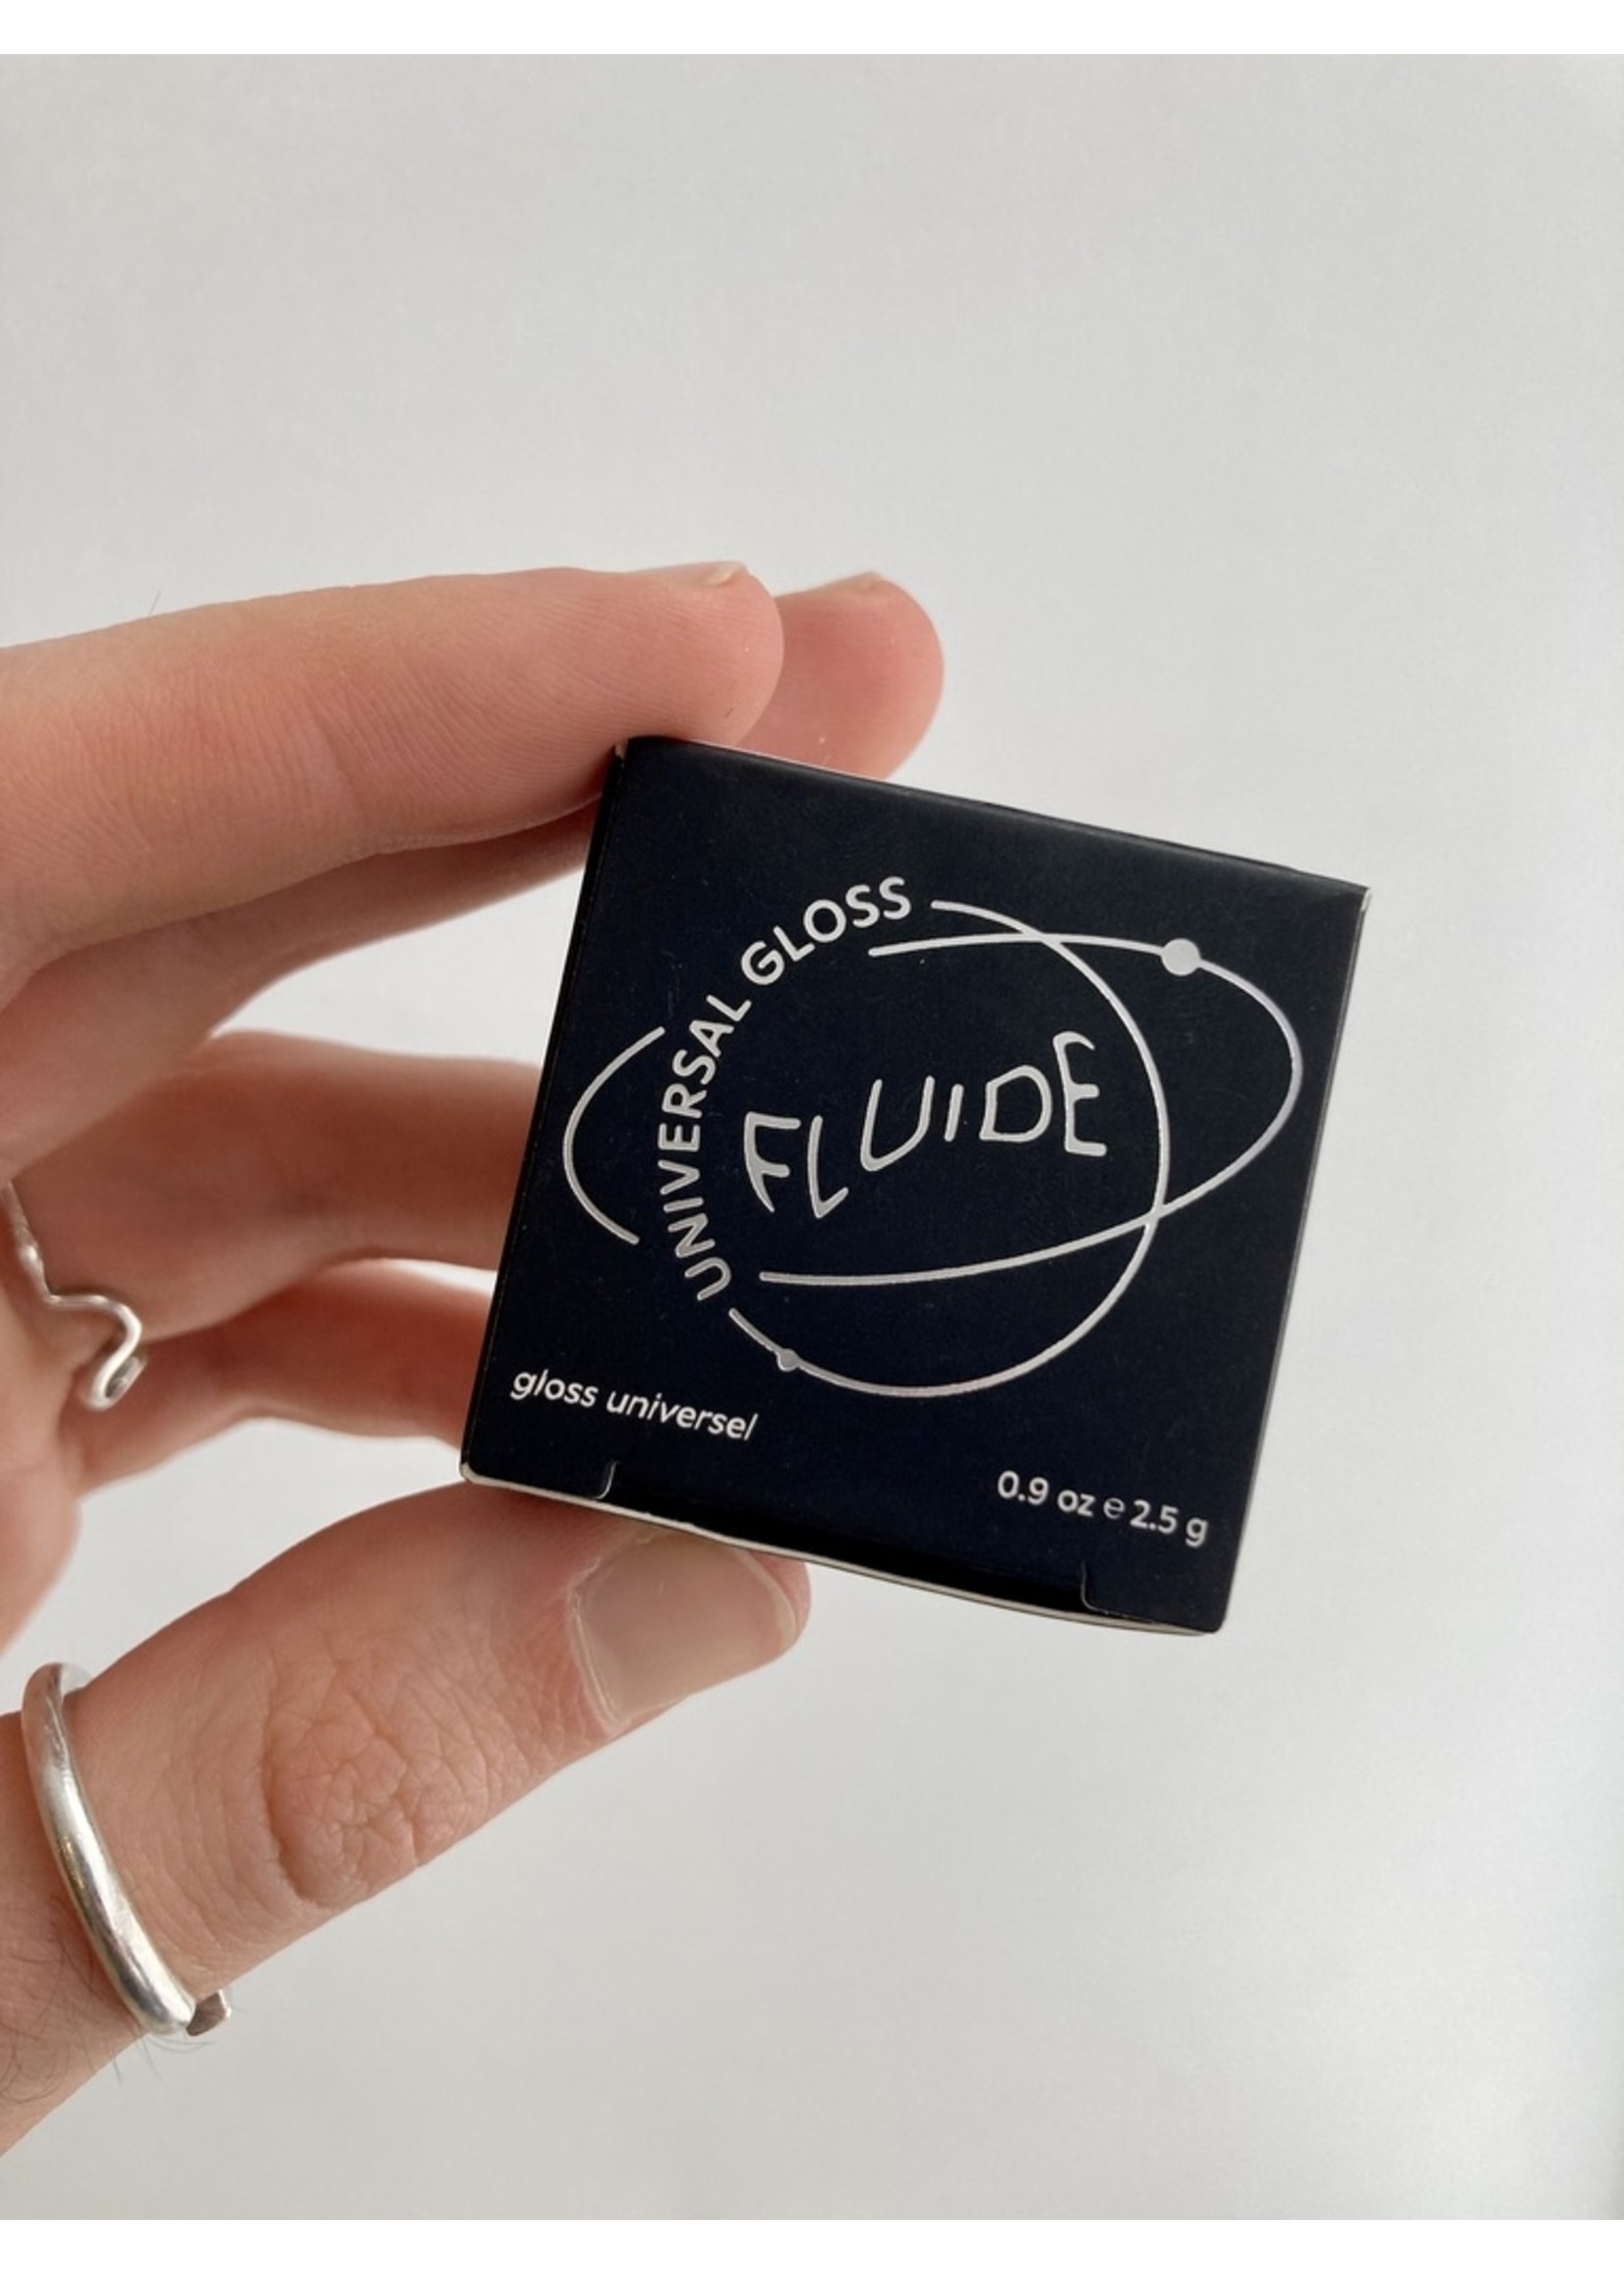 Fluide Beauty "Universal Gloss" by We Are Fluide